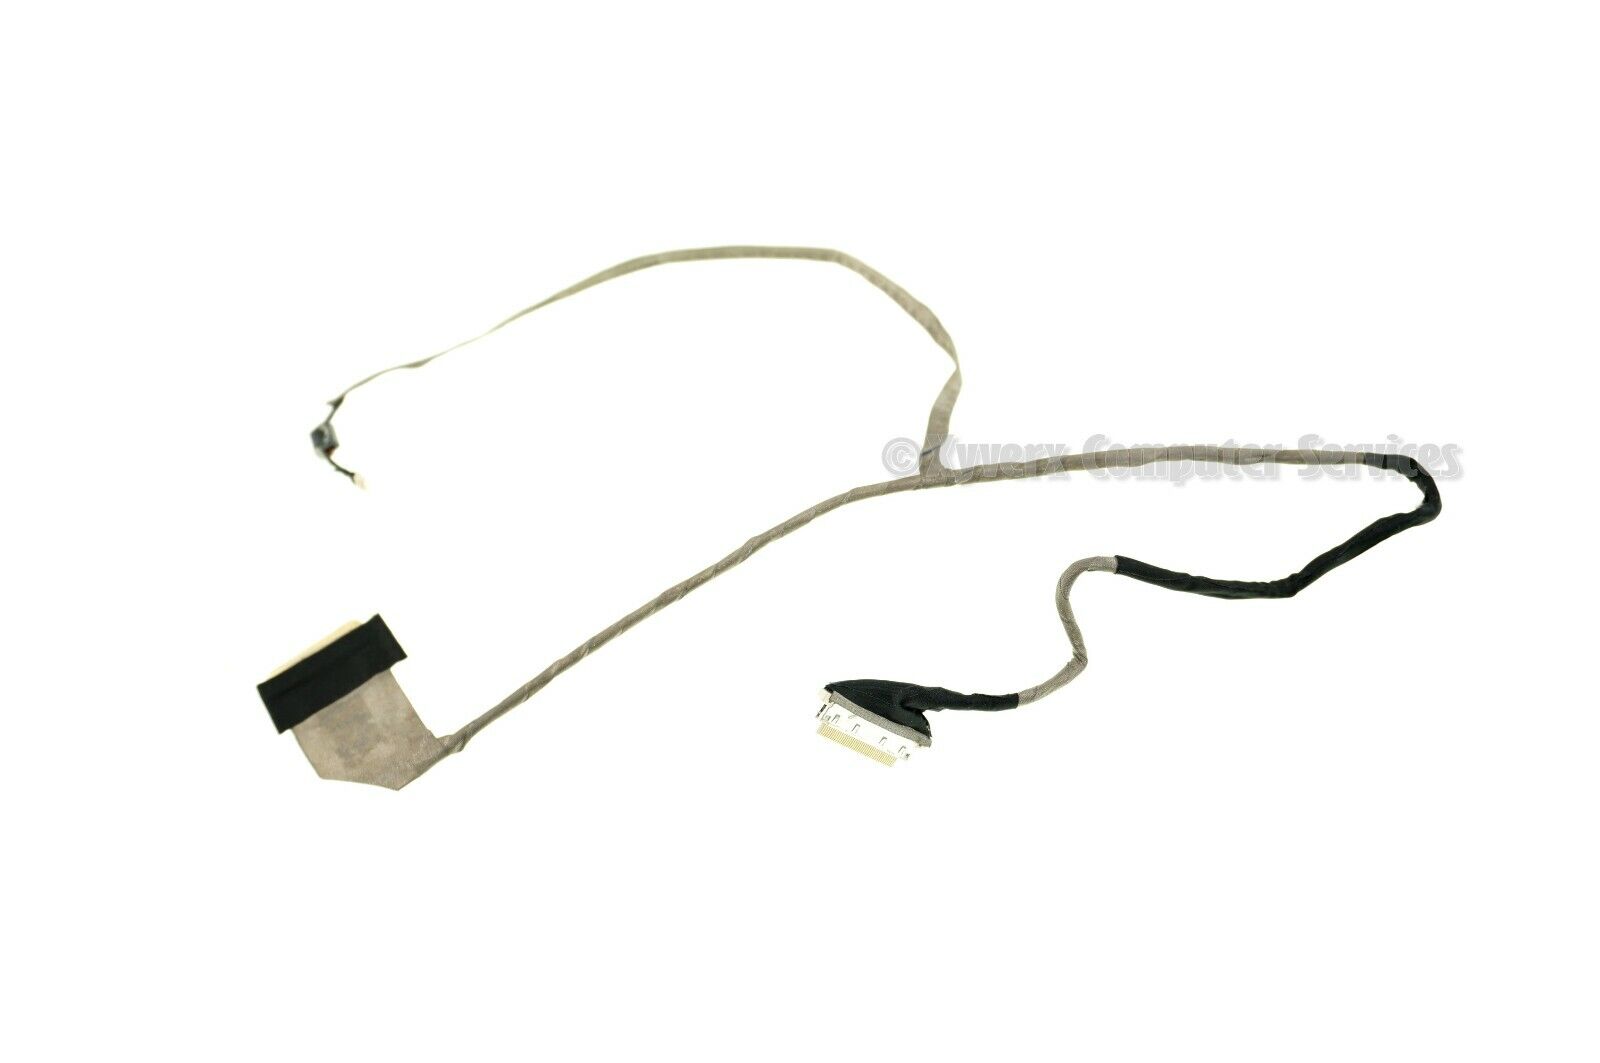 5741-5698 NEW70 OEM ACER LCD DISPLAY CABLE ASPIRE 5741-5698 NEW70 (GRD A)(CC611)